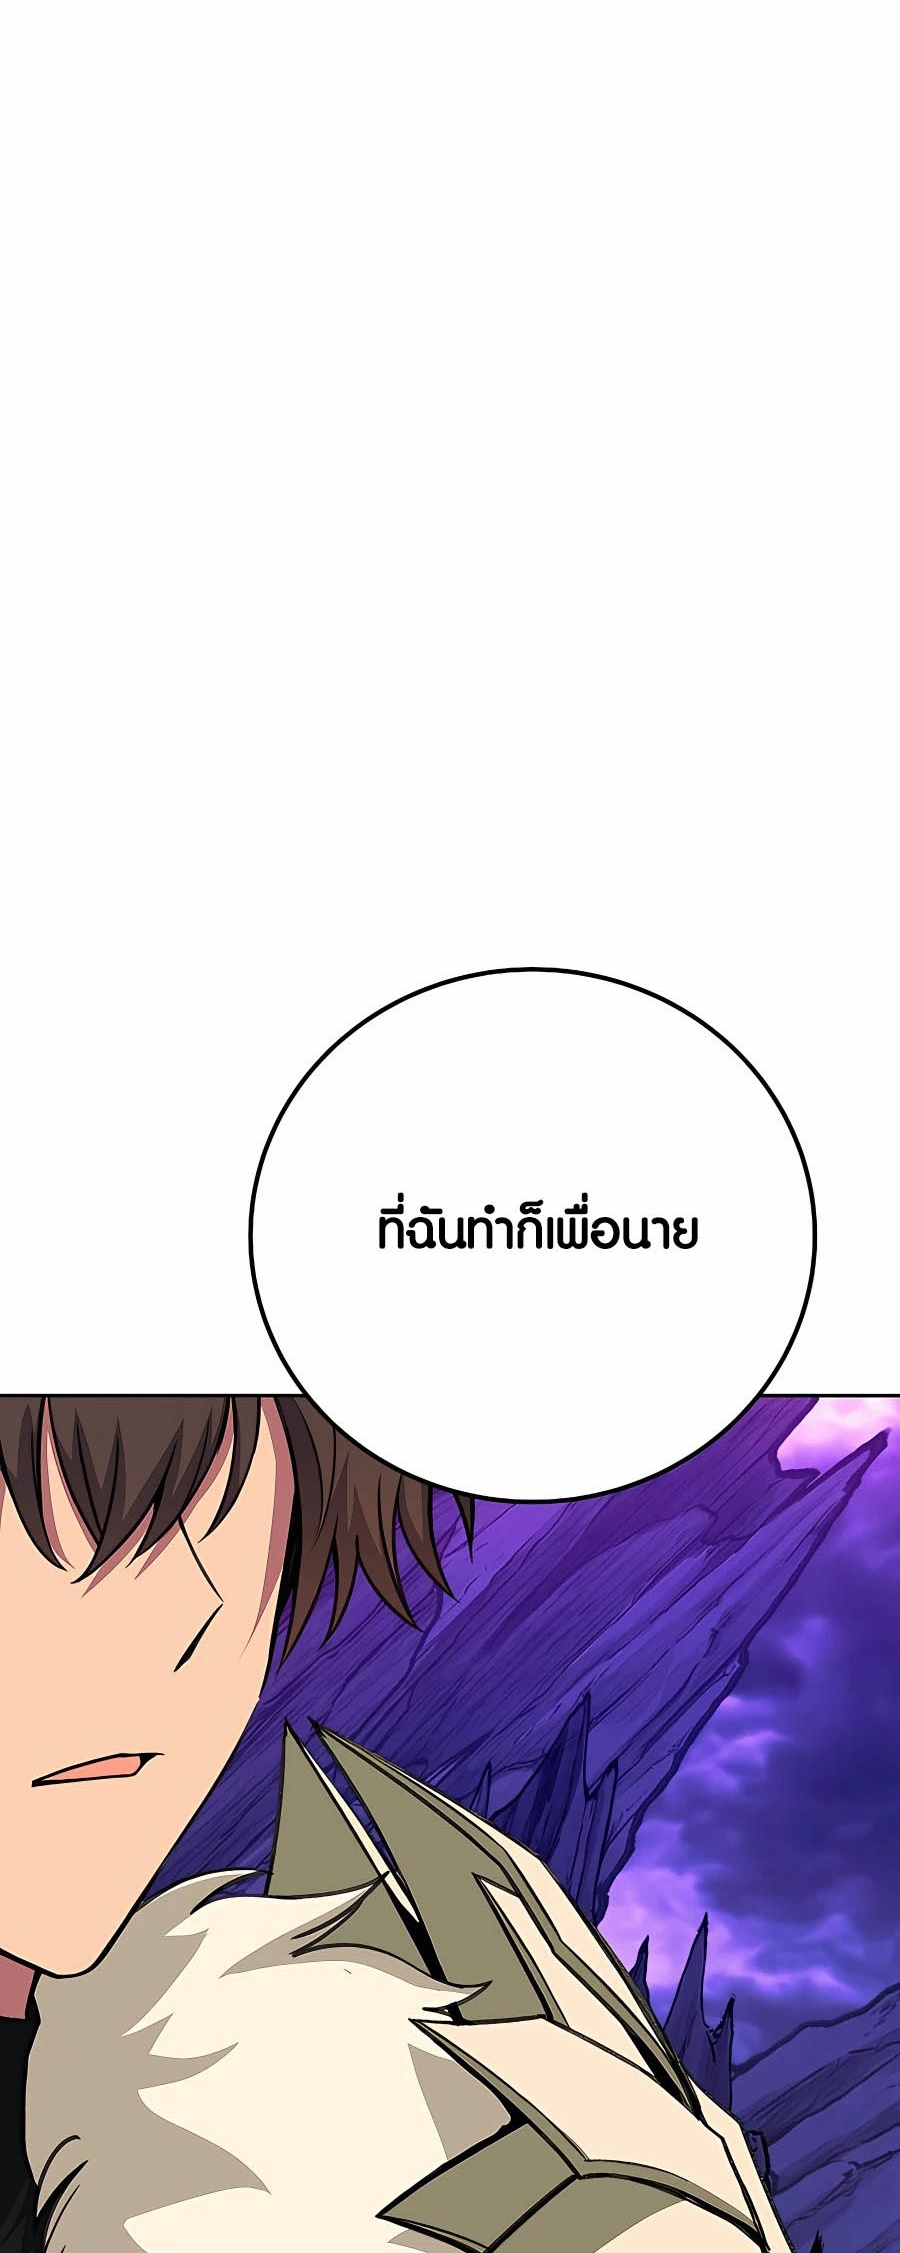 à¸­à¹ˆà¸²à¸™à¸¡à¸±à¸™à¸®à¸§à¸² à¹€à¸£à¸·à¹ˆà¸­à¸‡ The Part Time Land of the Gods 55 54